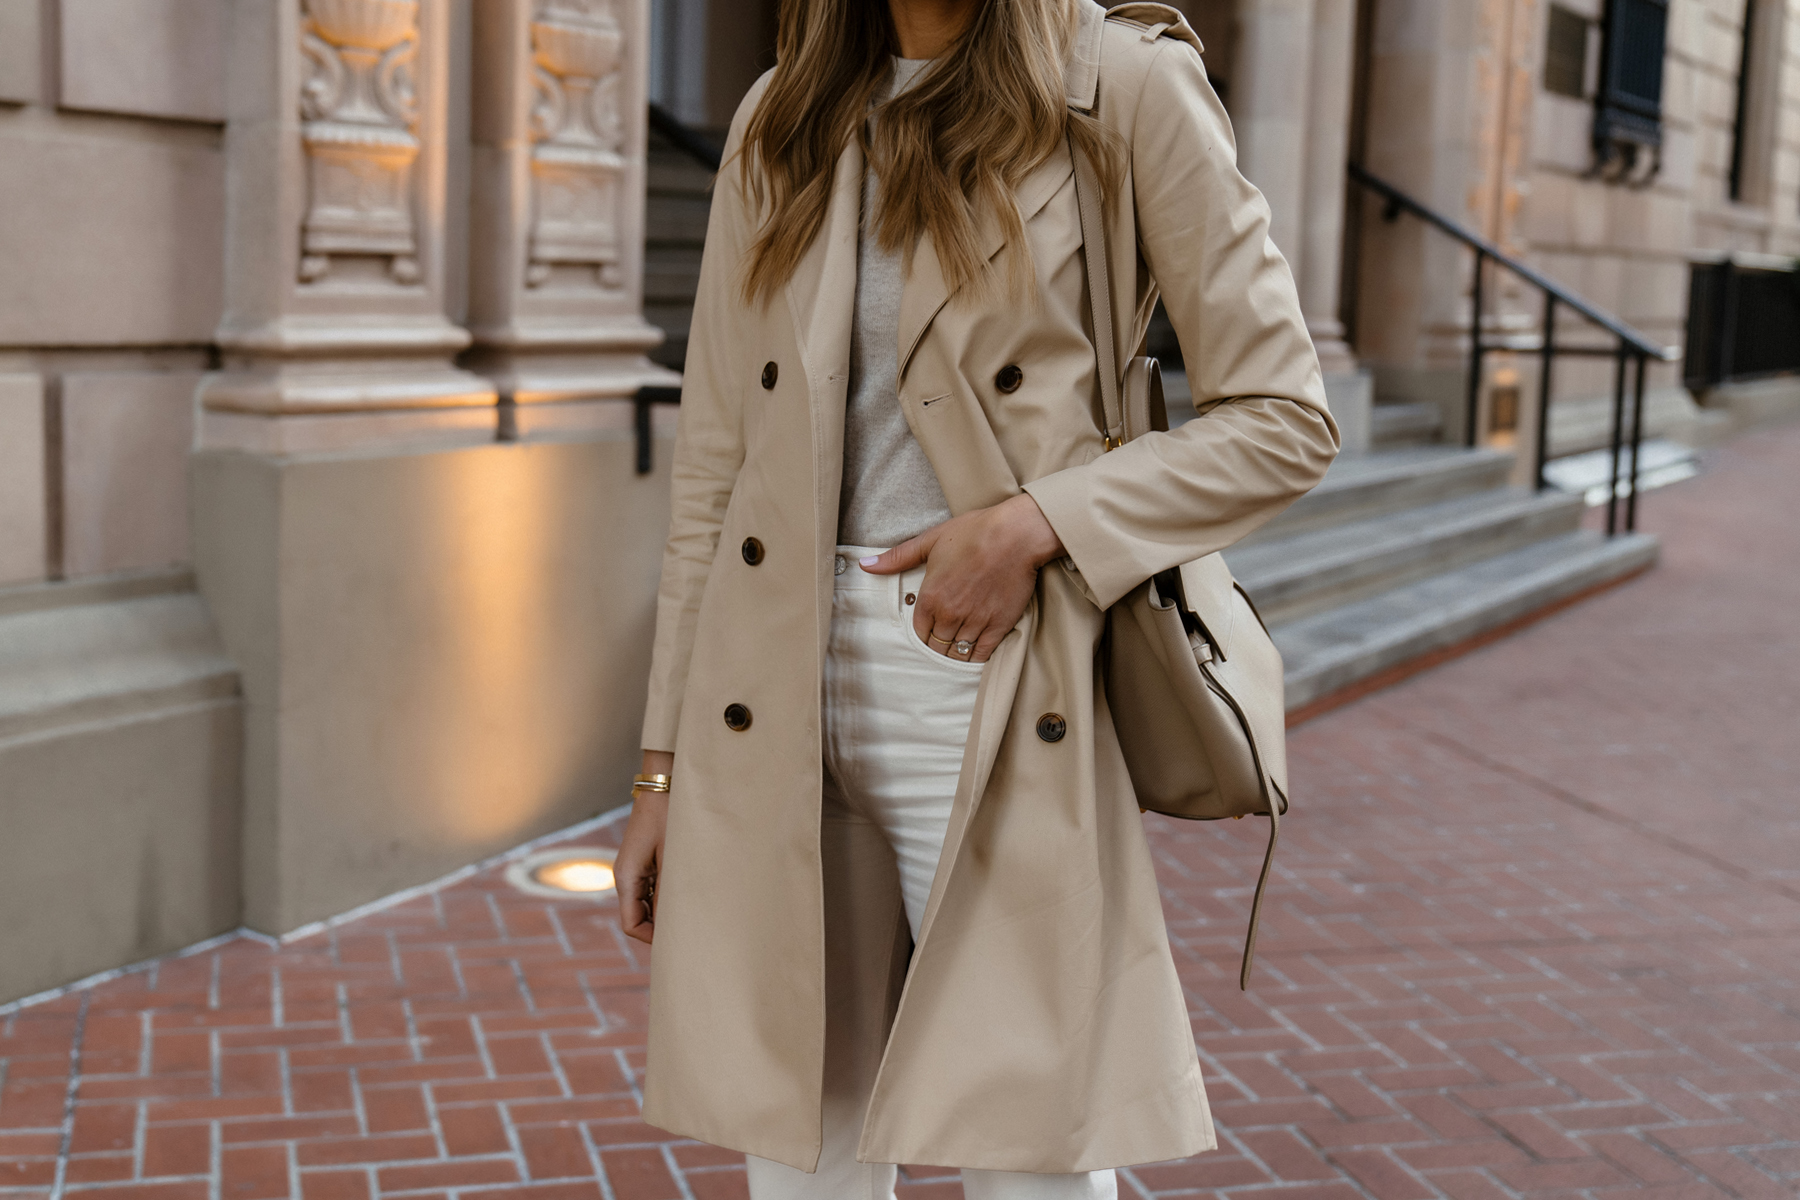 Fashion Jackson Wearing Jcrew Womens Trench Coat Outfit 1